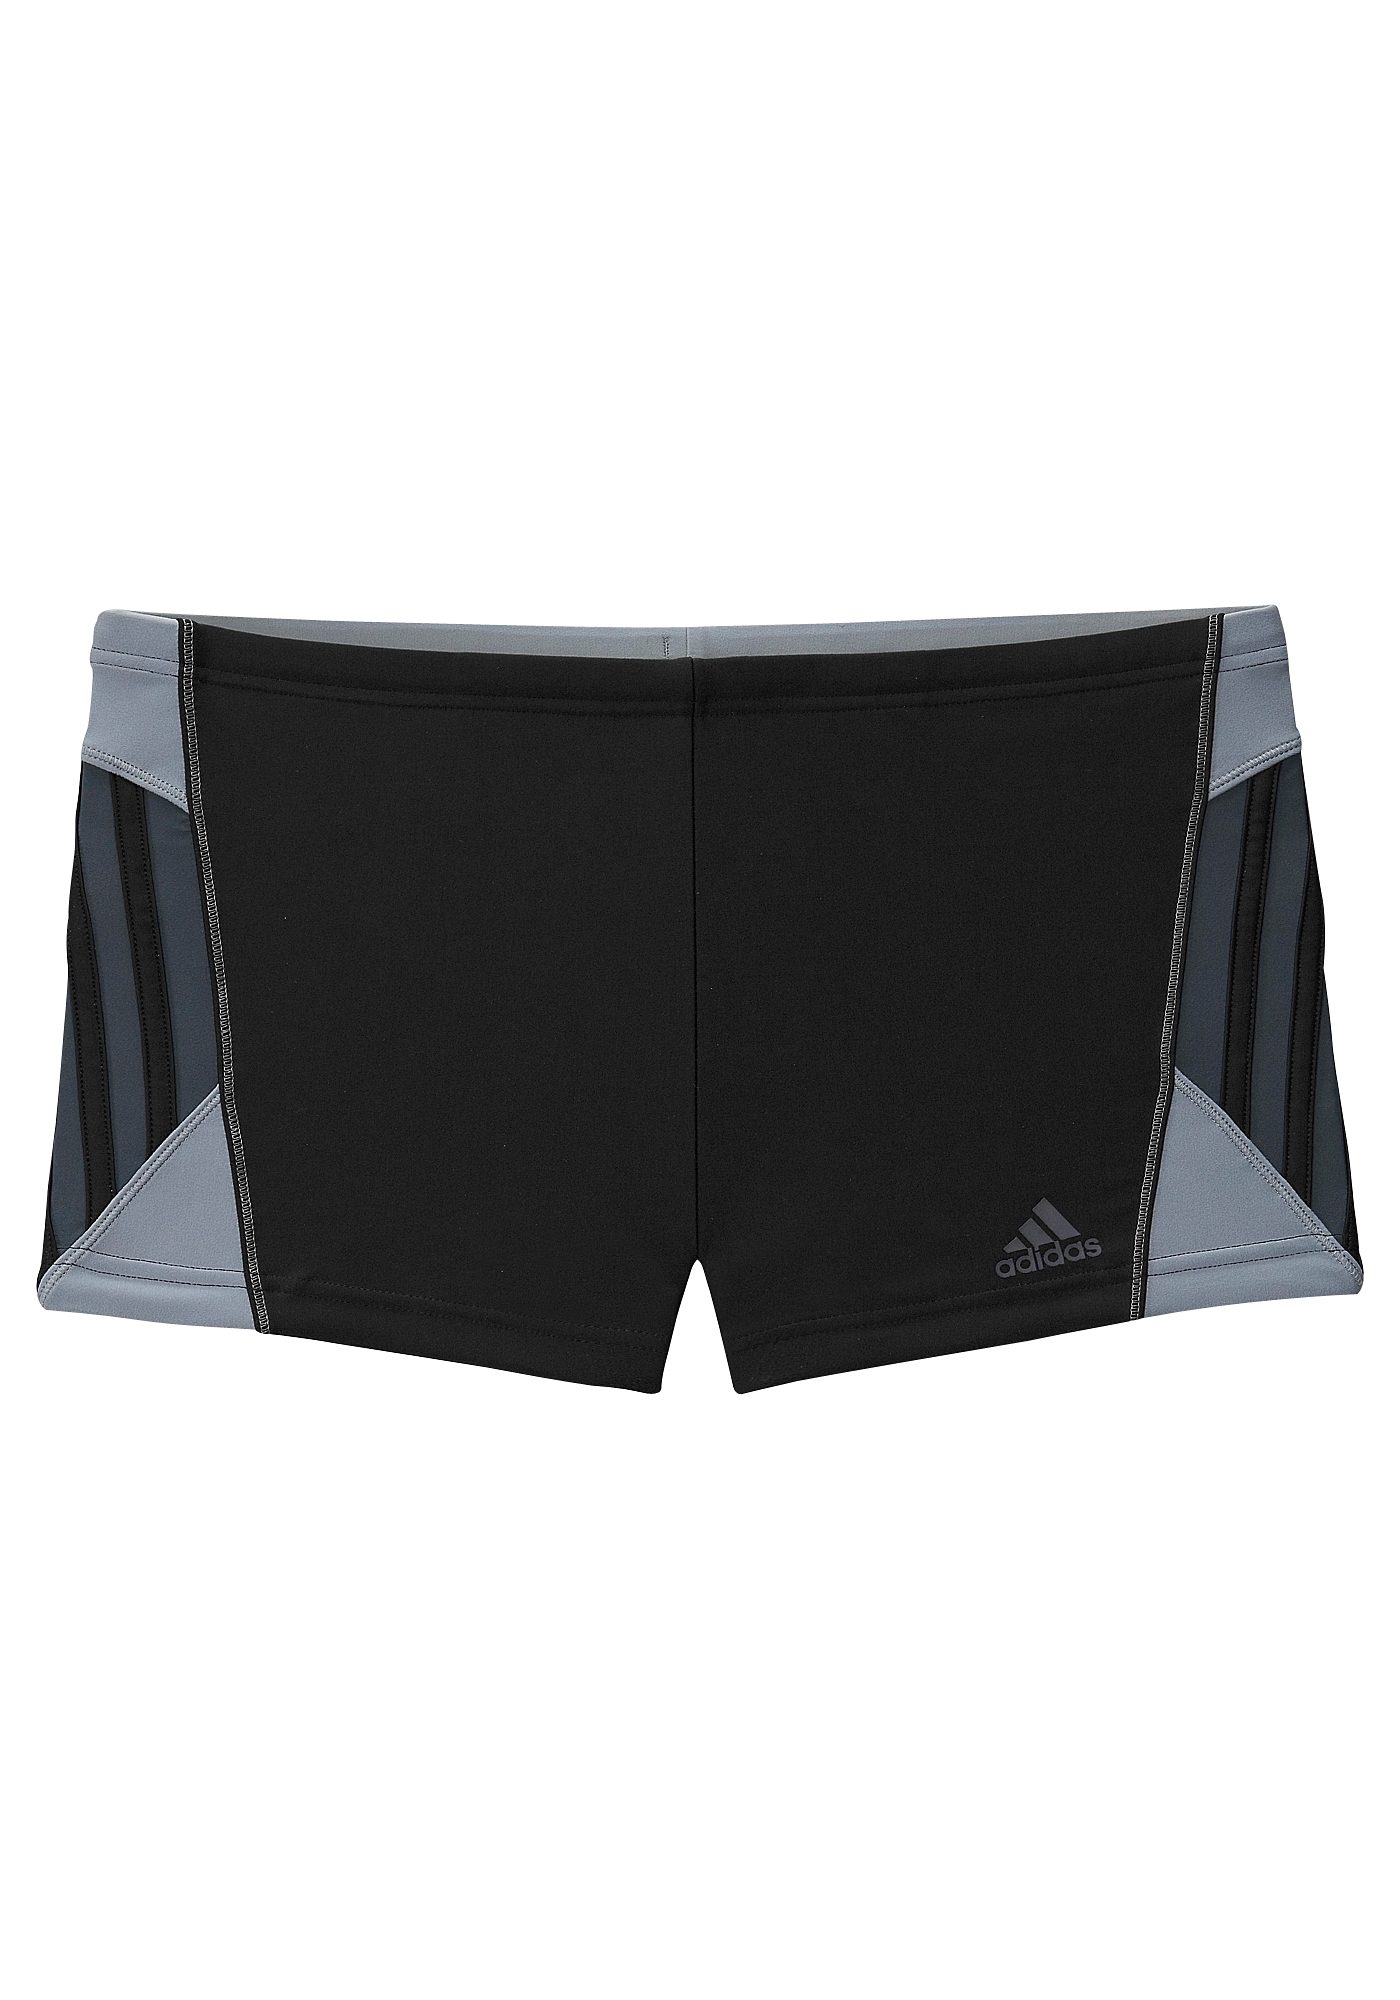 adidas Performance NU 15% KORTING: adidas Performance Zwemboxer in 3-strepen-look